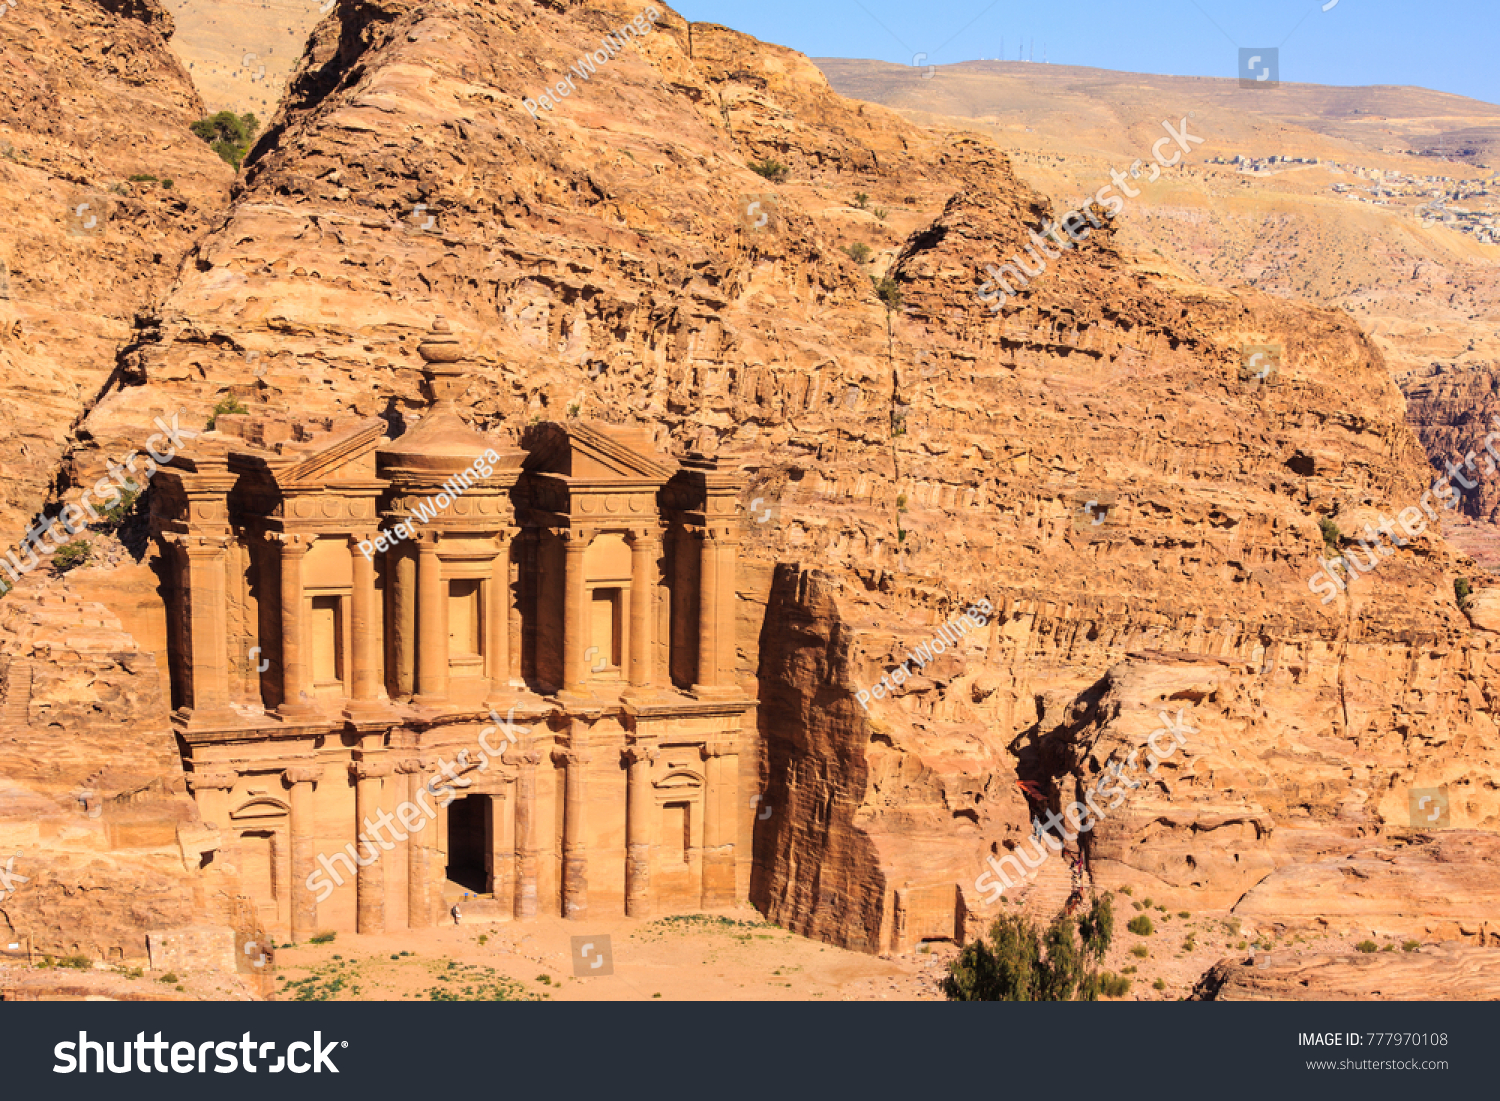 The Monastery Ad Deir monumental building carved out of rock in the ancient city of Petra, Jordan #777970108